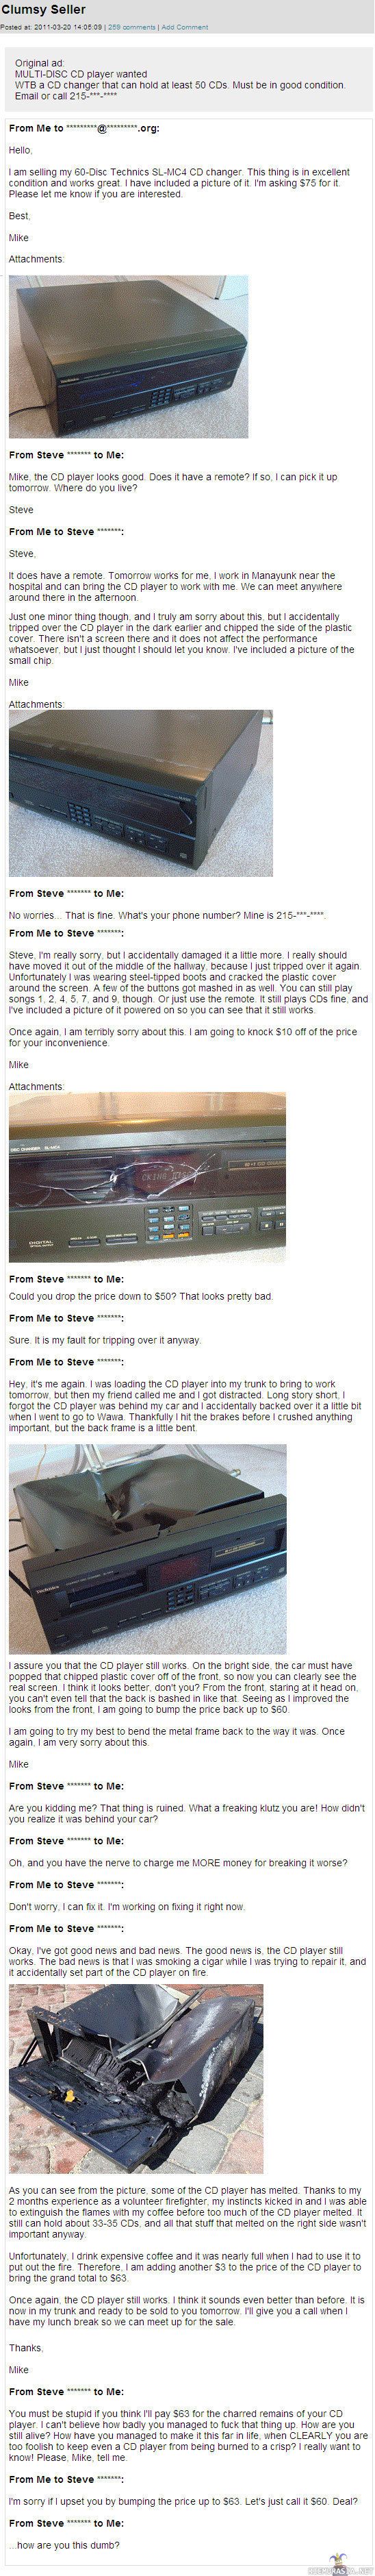 Selling a CD player